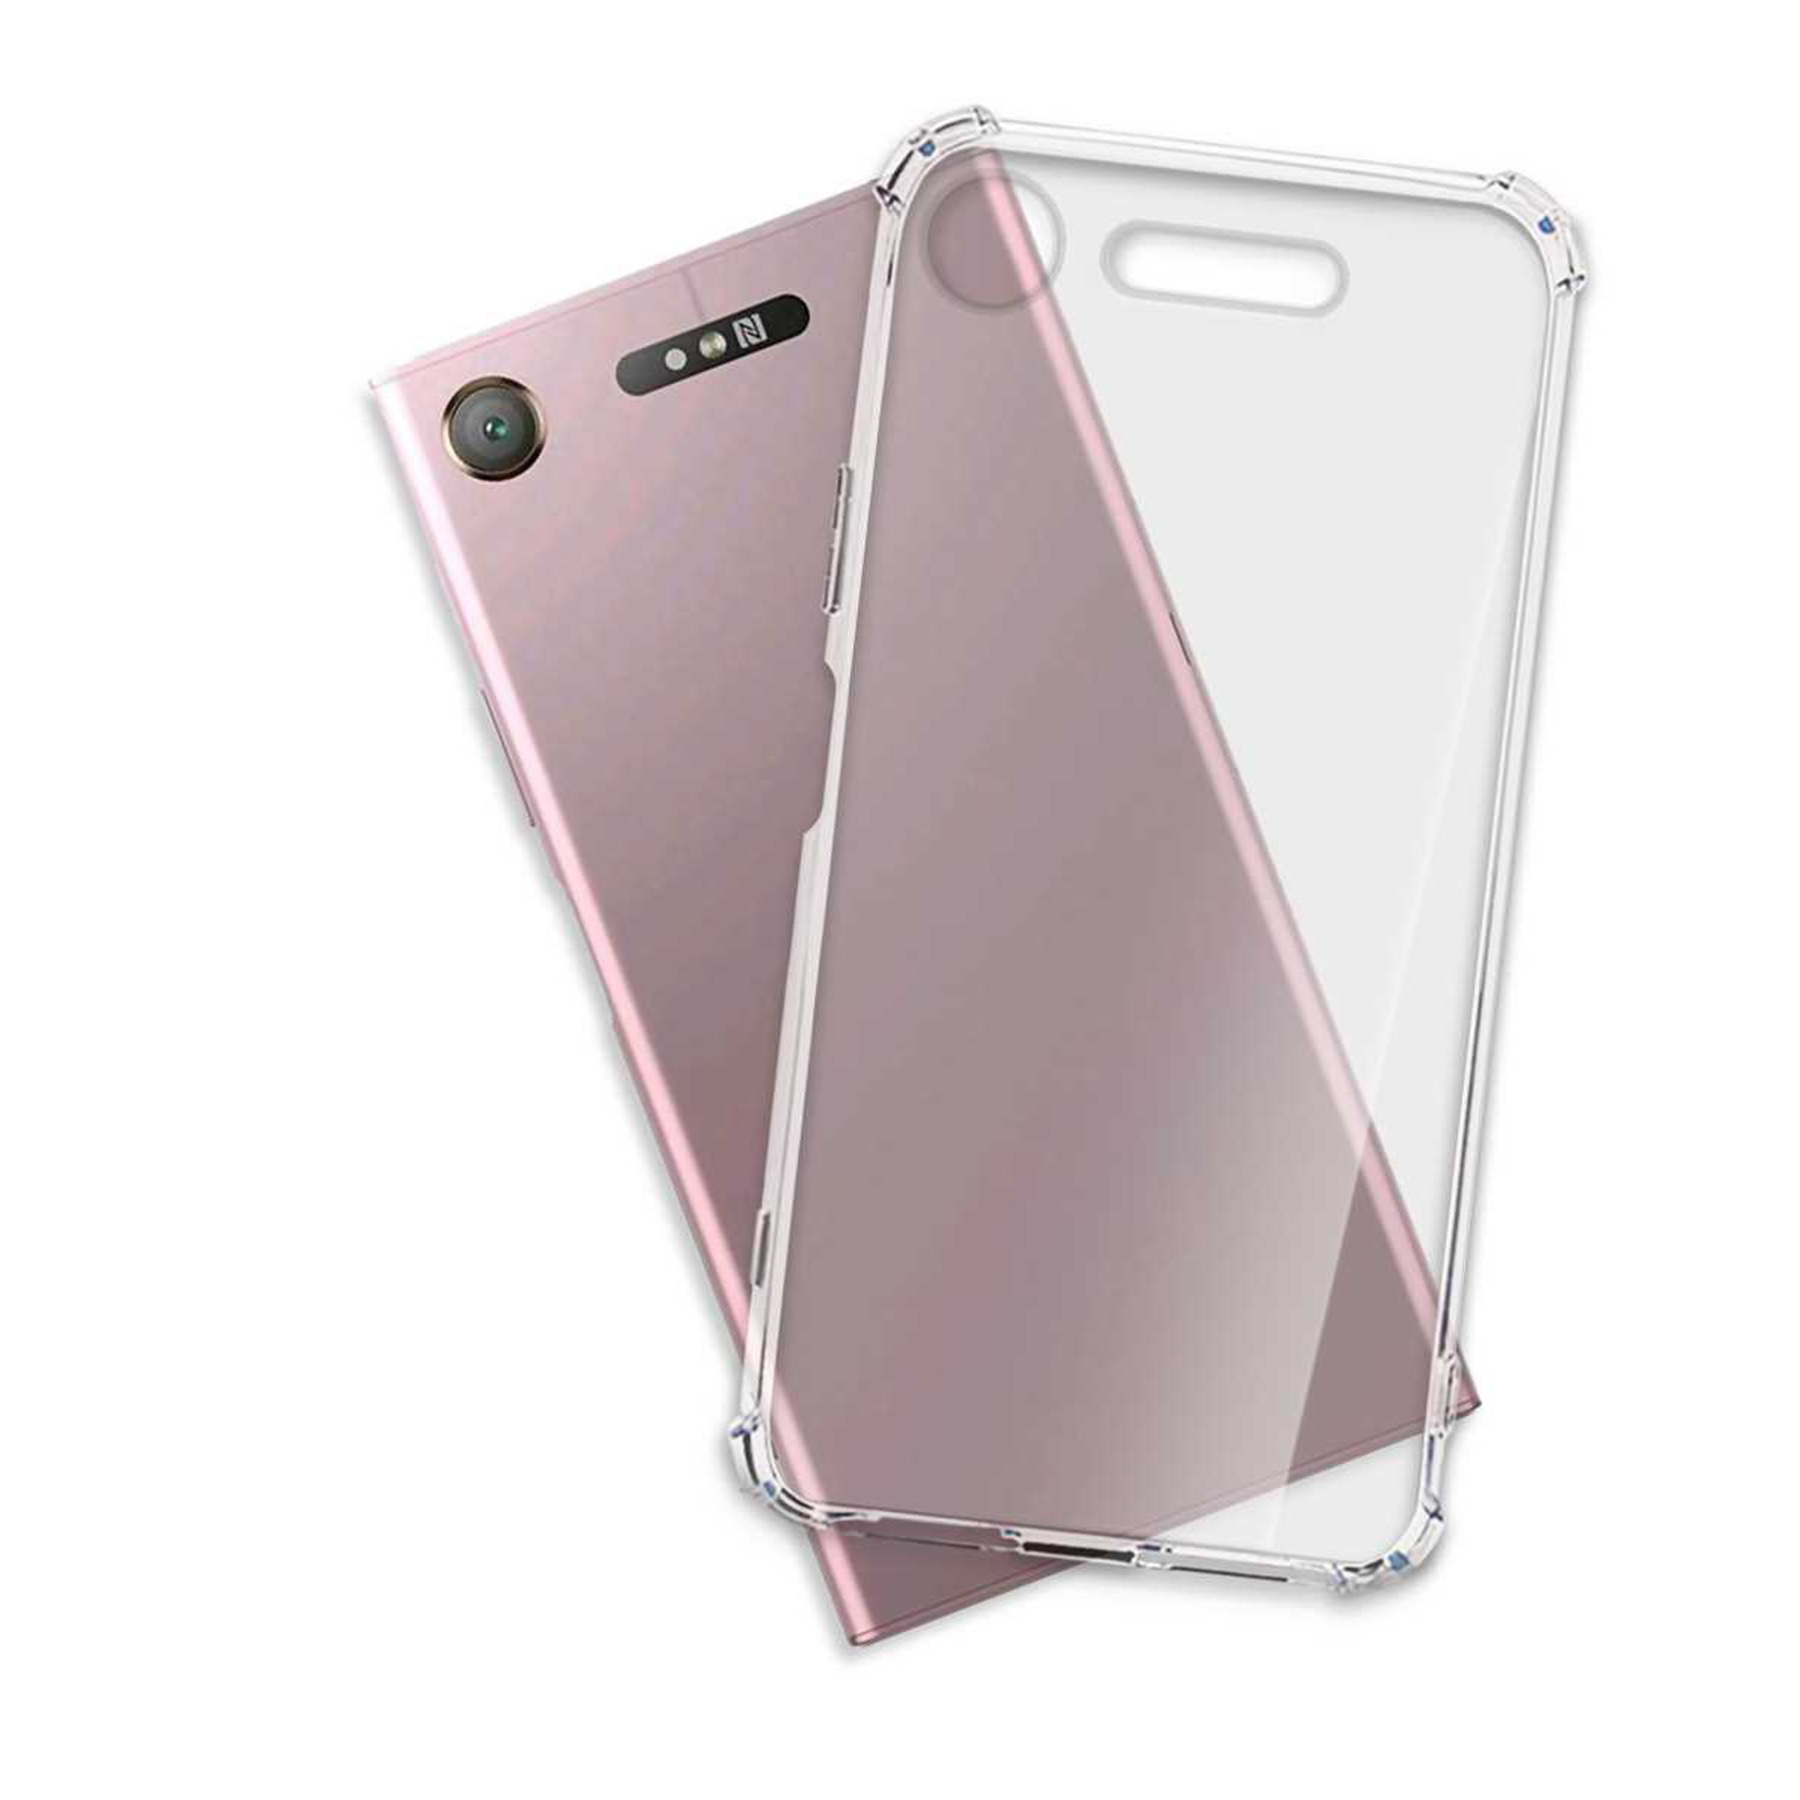 MTB MORE ENERGY Clear Sony, Armor XZ1, Backcover, Transparent Case, Xperia